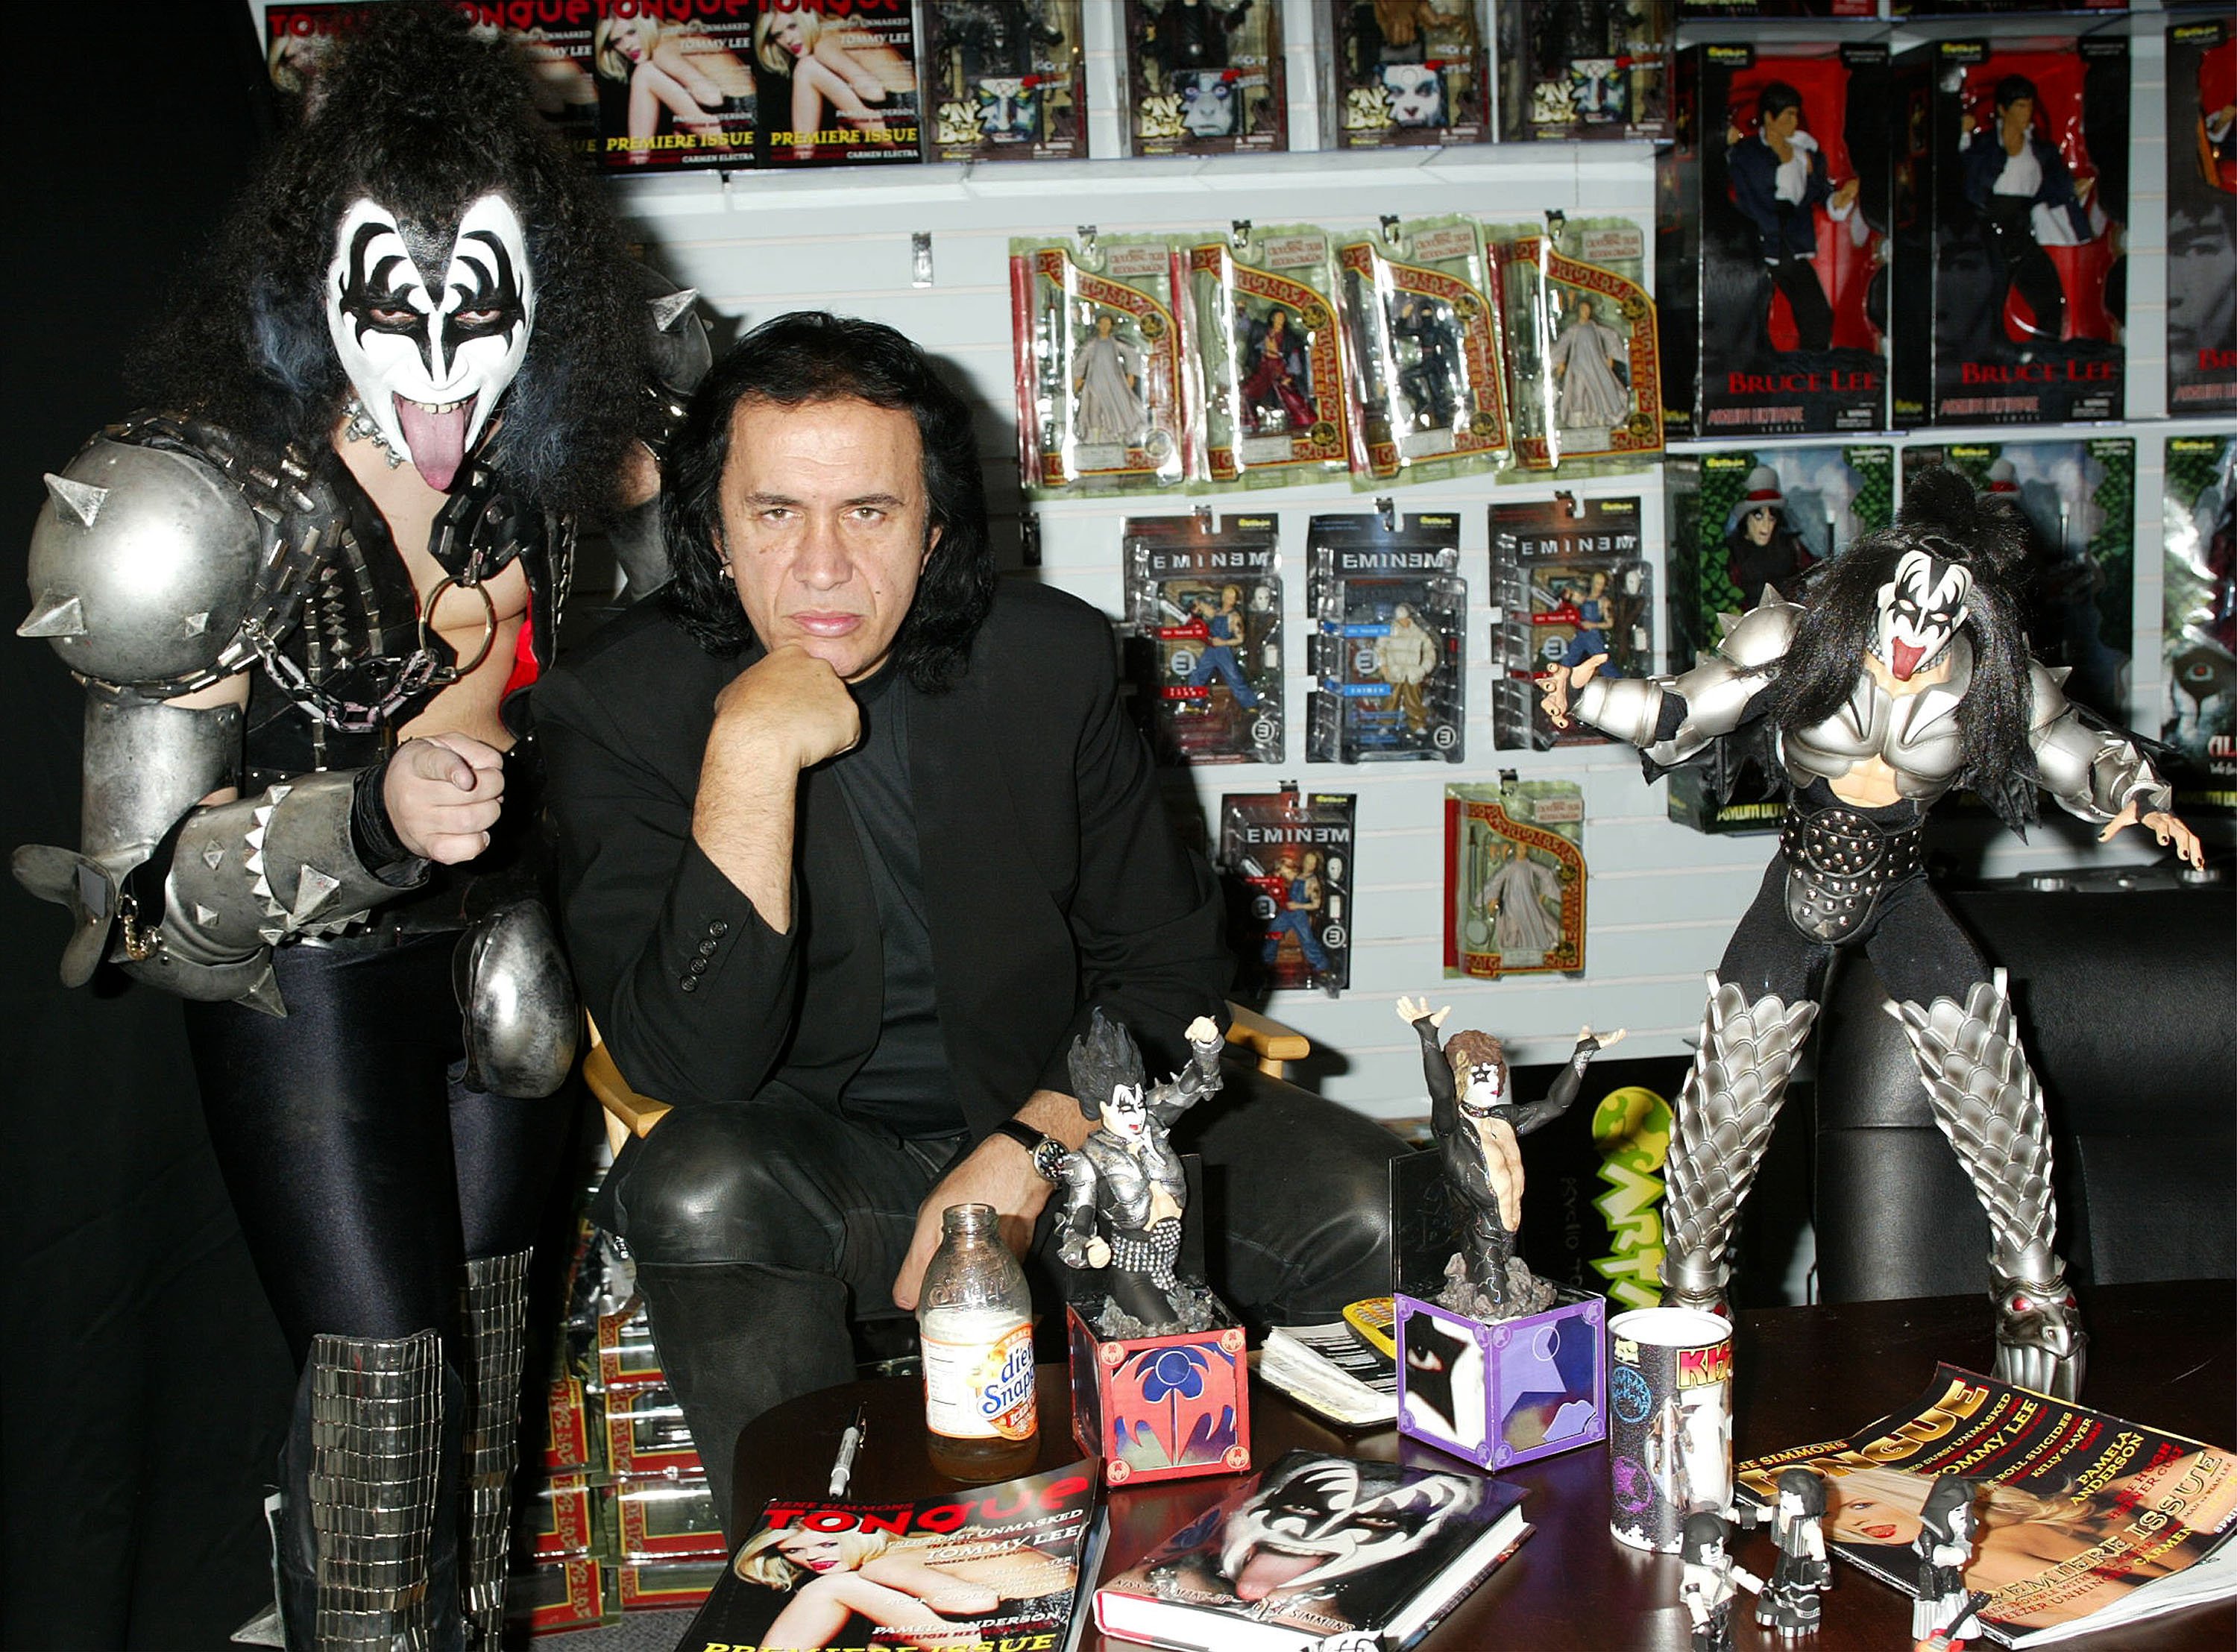 Gene Simmons with Kiss toys